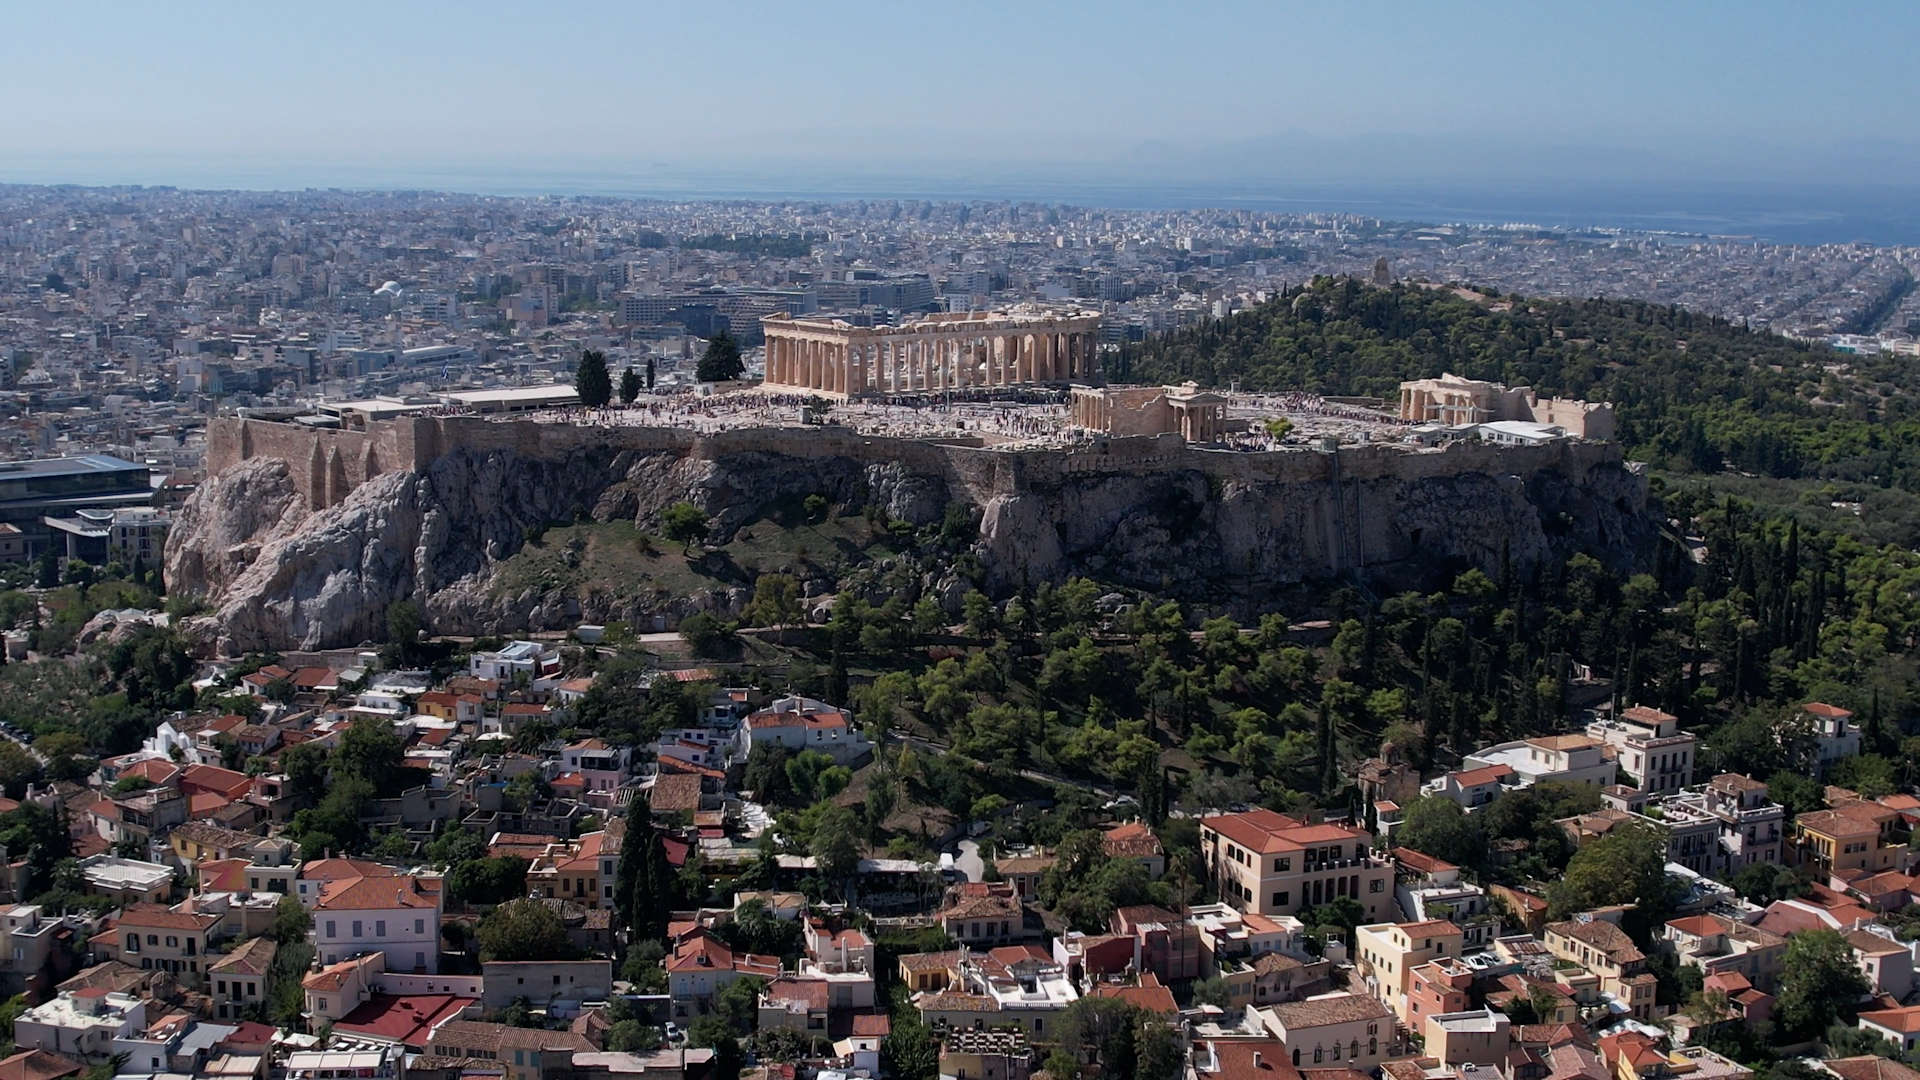 The Parthenon in Athens sees over one million visitors every week during peak tourist season. /CGTNEurope